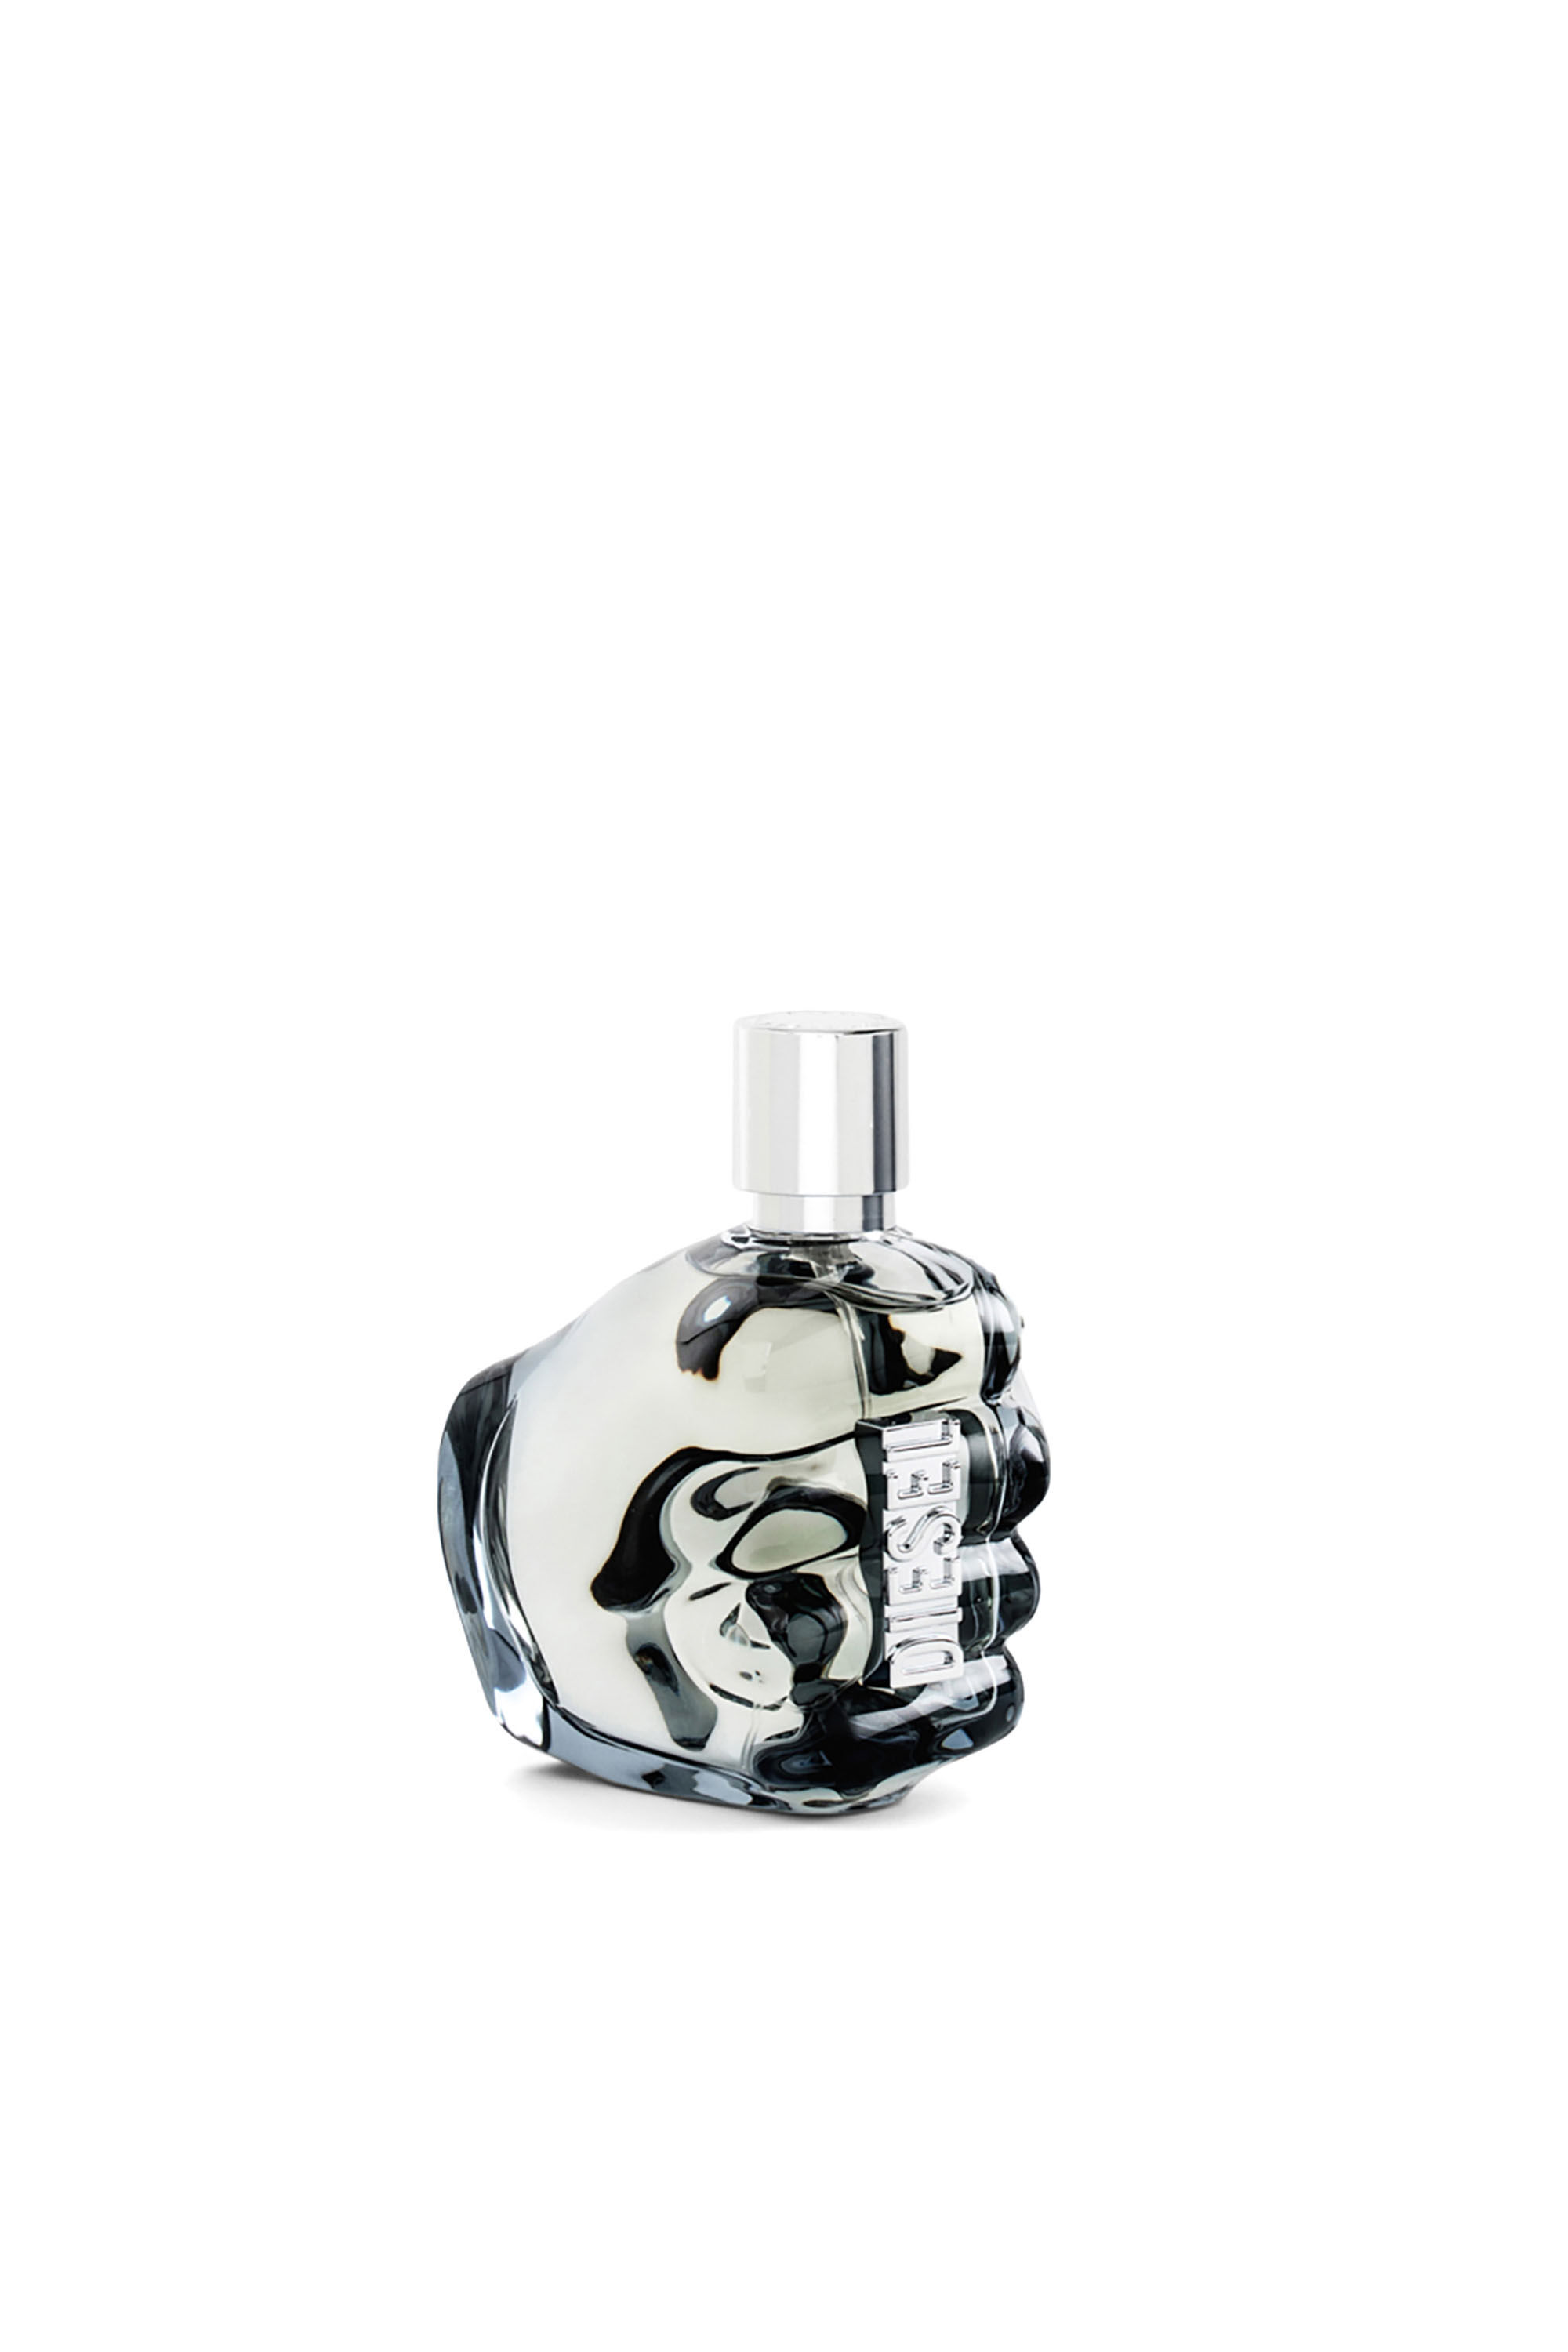 Diesel - ONLY THE BRAVE 75ML , Male Only The Brave 75ml, 2.5 FL.OZ., Eau de Toilette in White - Image 1